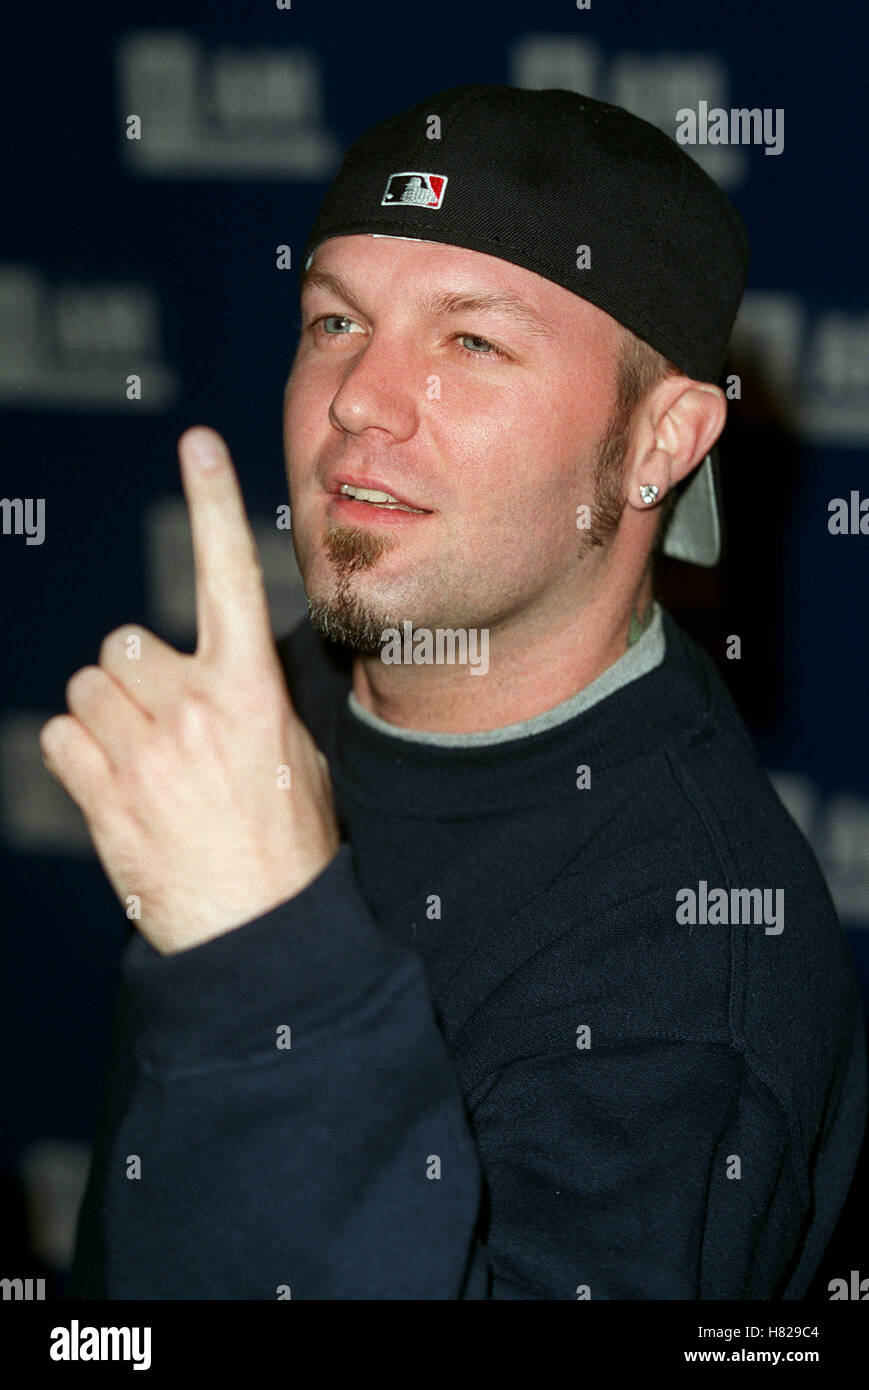 FRED DURST LOS ANGELES USA 20 March 2000 Stock Photo